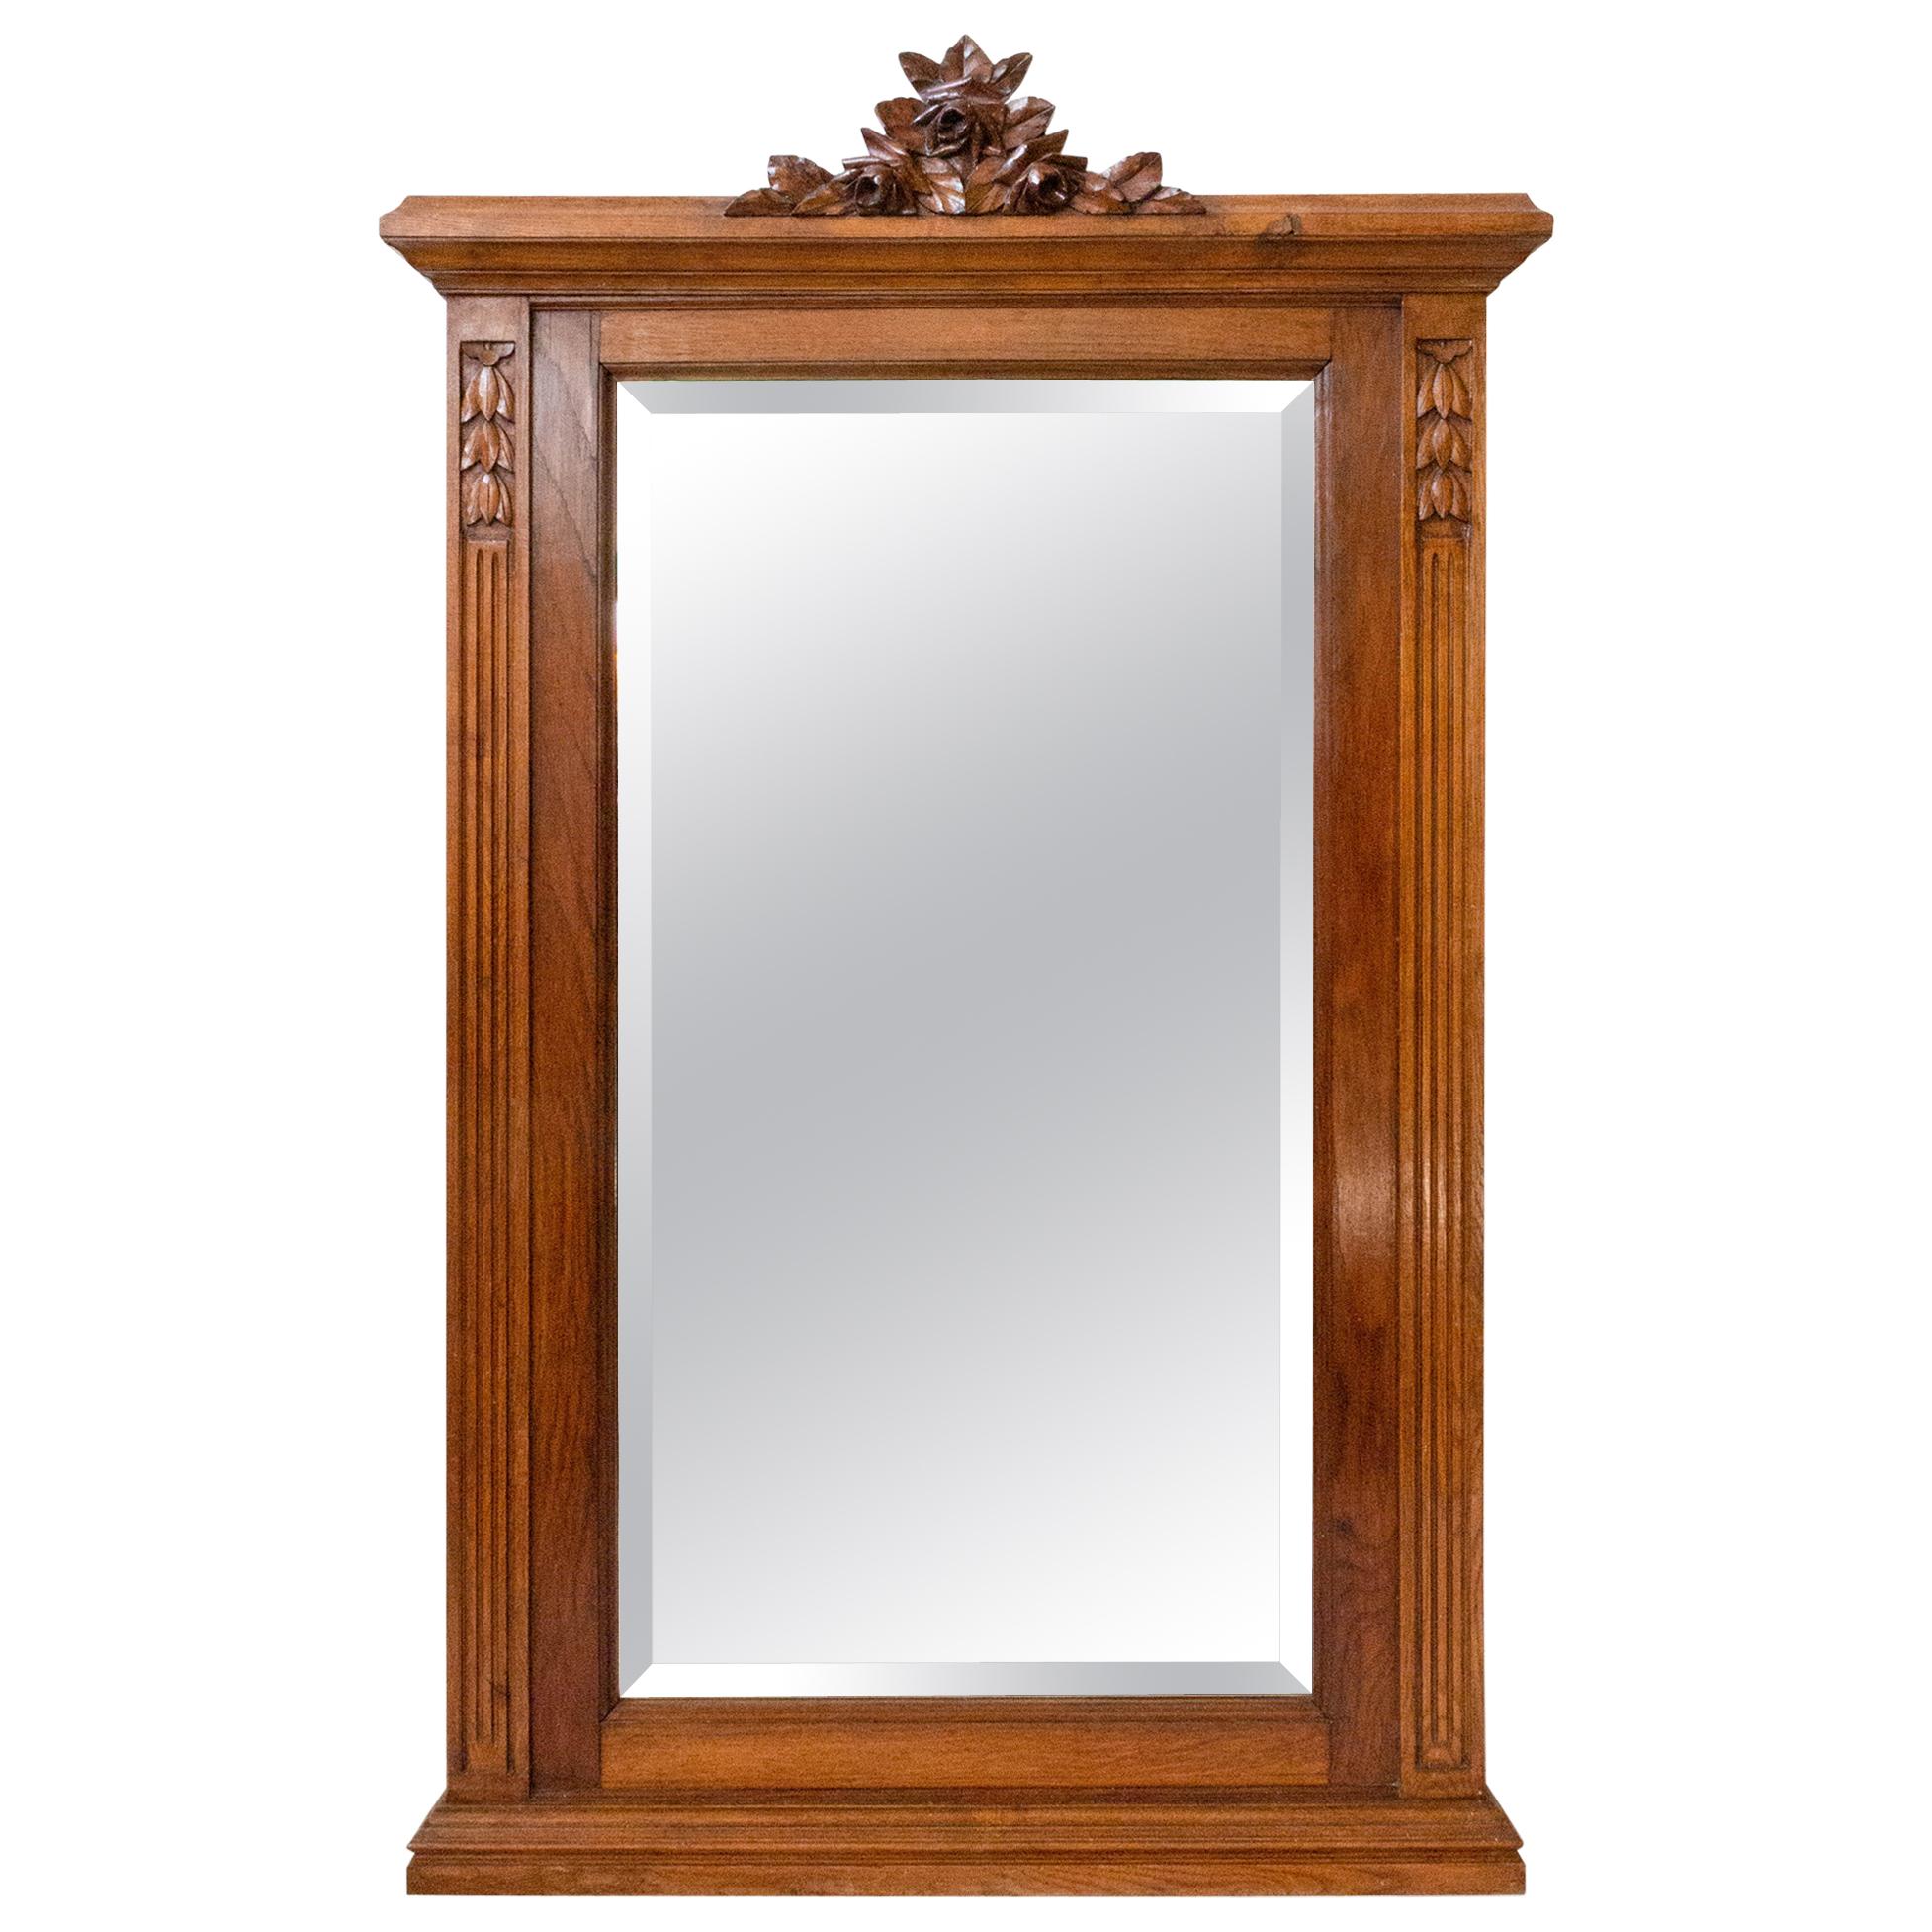 French Art Nouveau Louis XVI Style Beveled Mirror, Early 20th C.